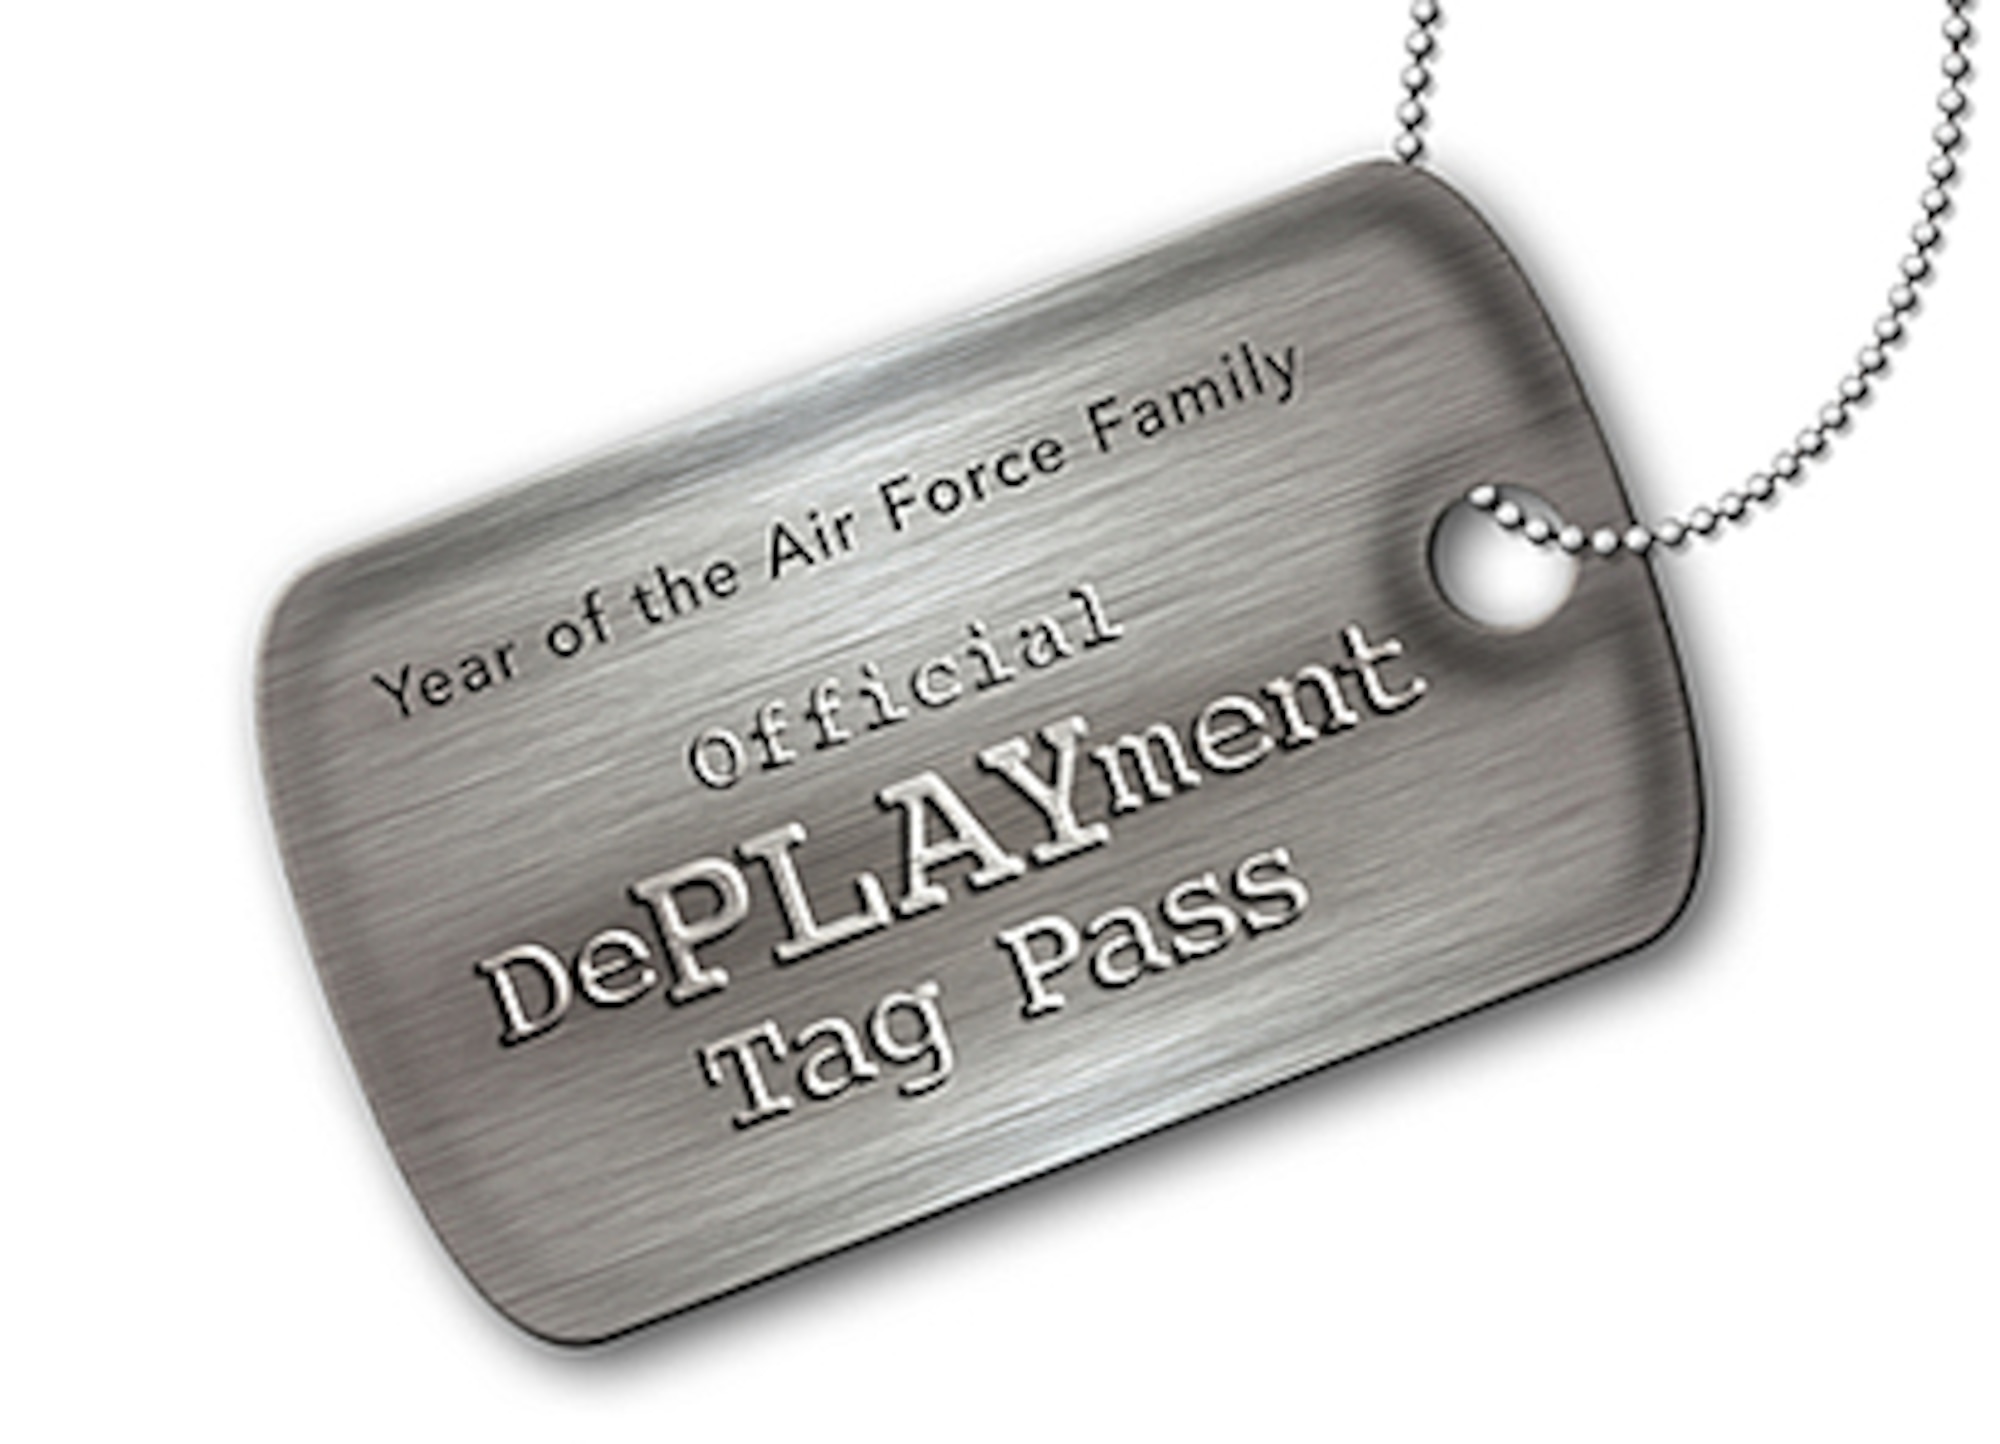 Air Force Services Agency officials will be offering DePLAYment tags to families of deployed members starting Monday through Jul. 31, 2010, as part of the Year of the Air Force Family.